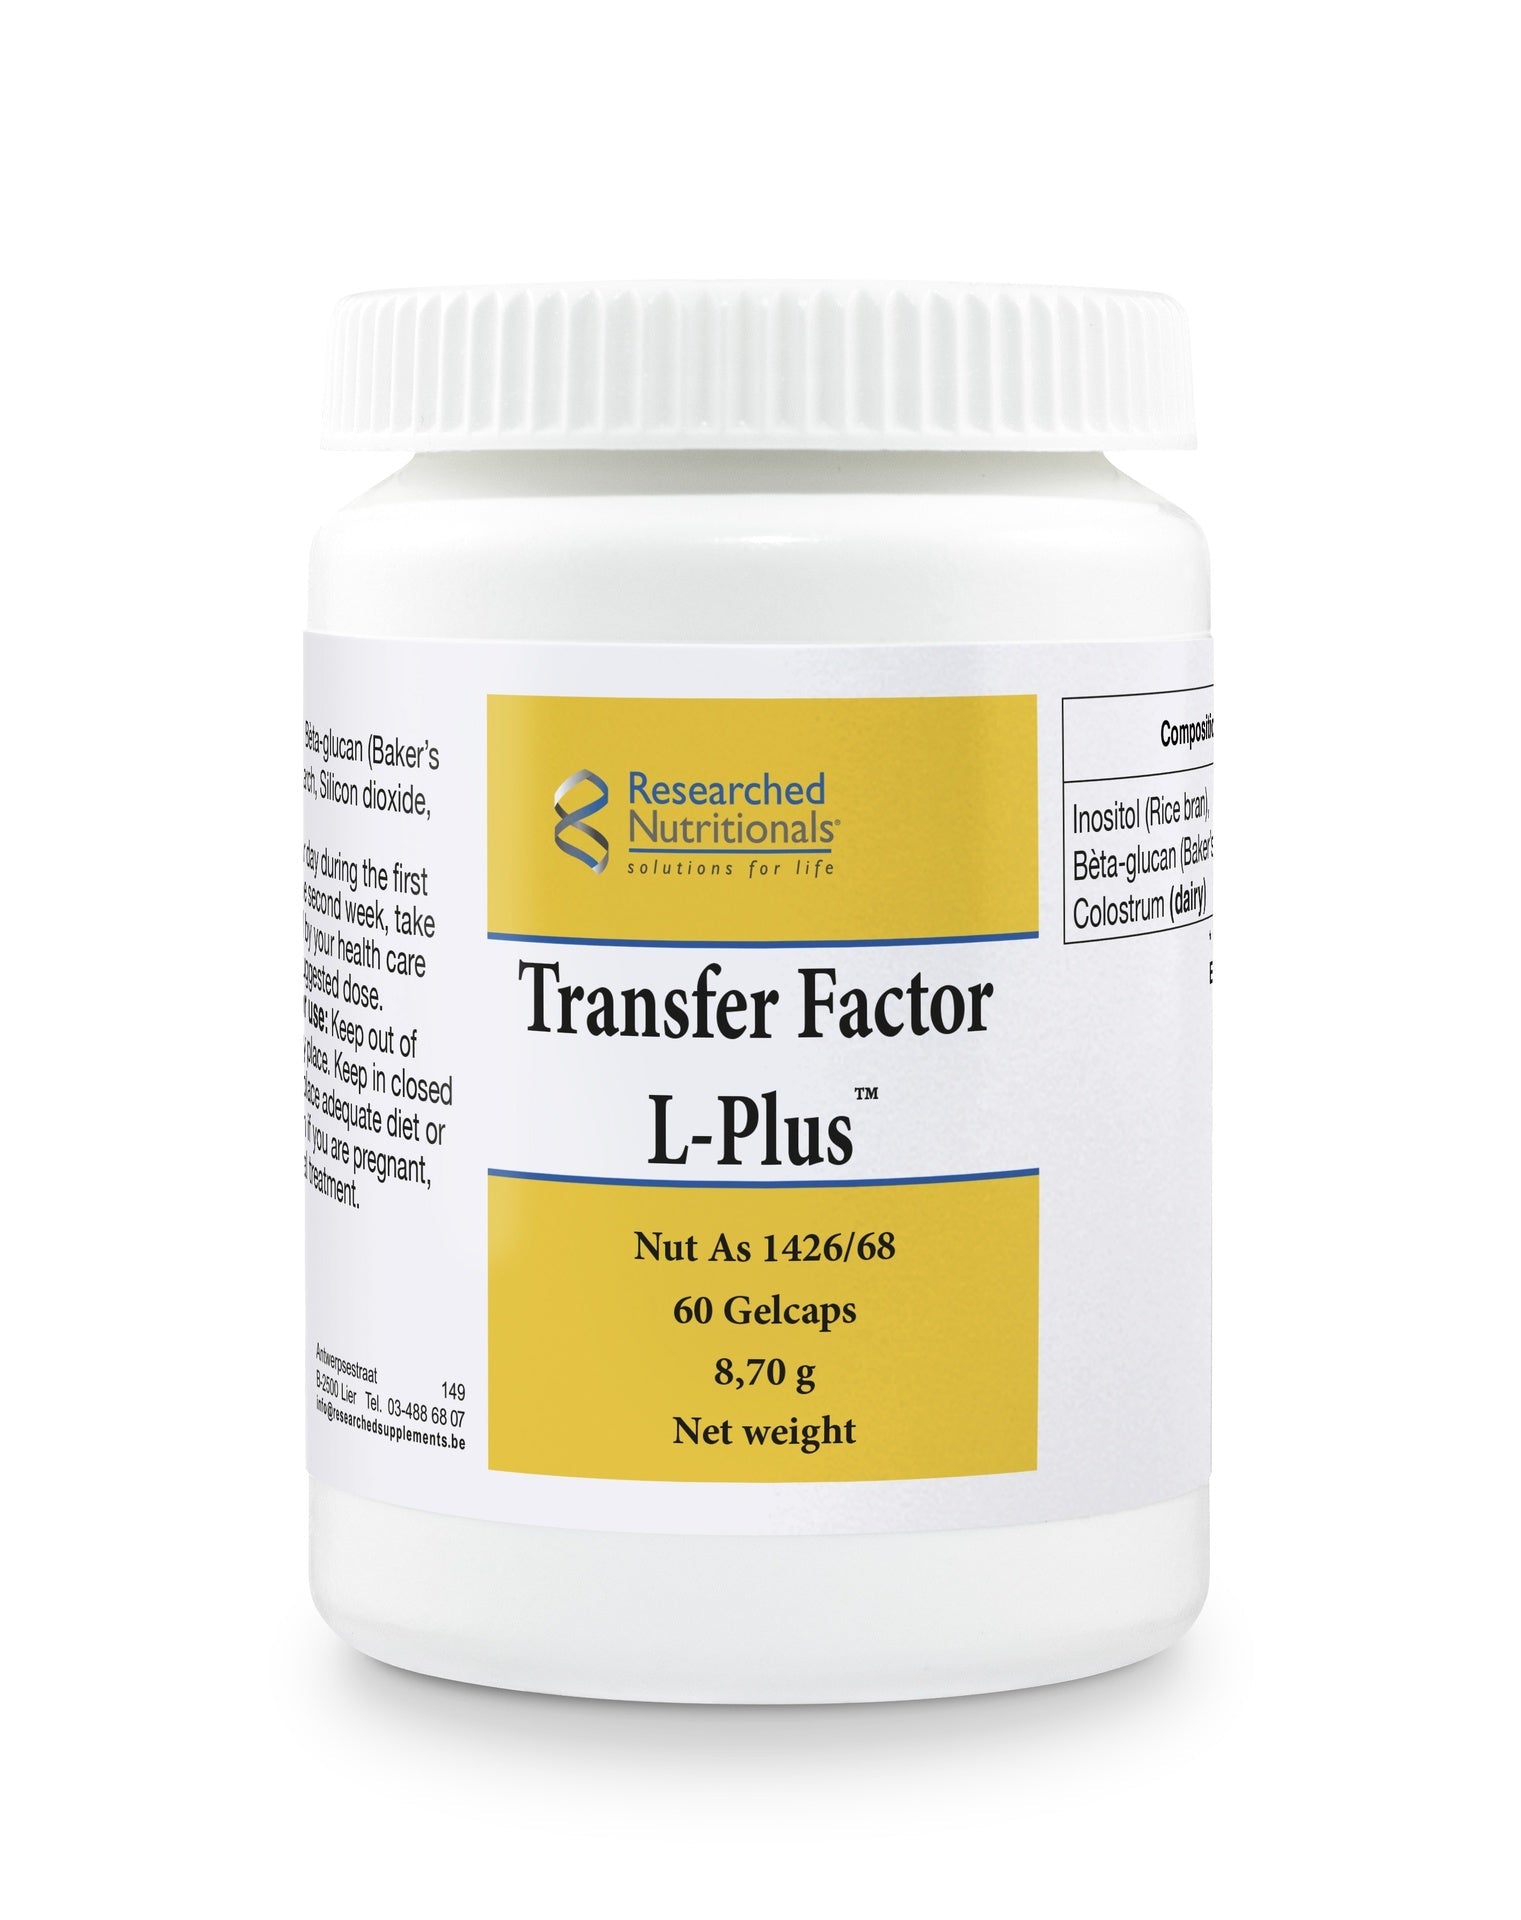 Transfer Factor L-Plus - 60 Capsules | Researched Nutritionals